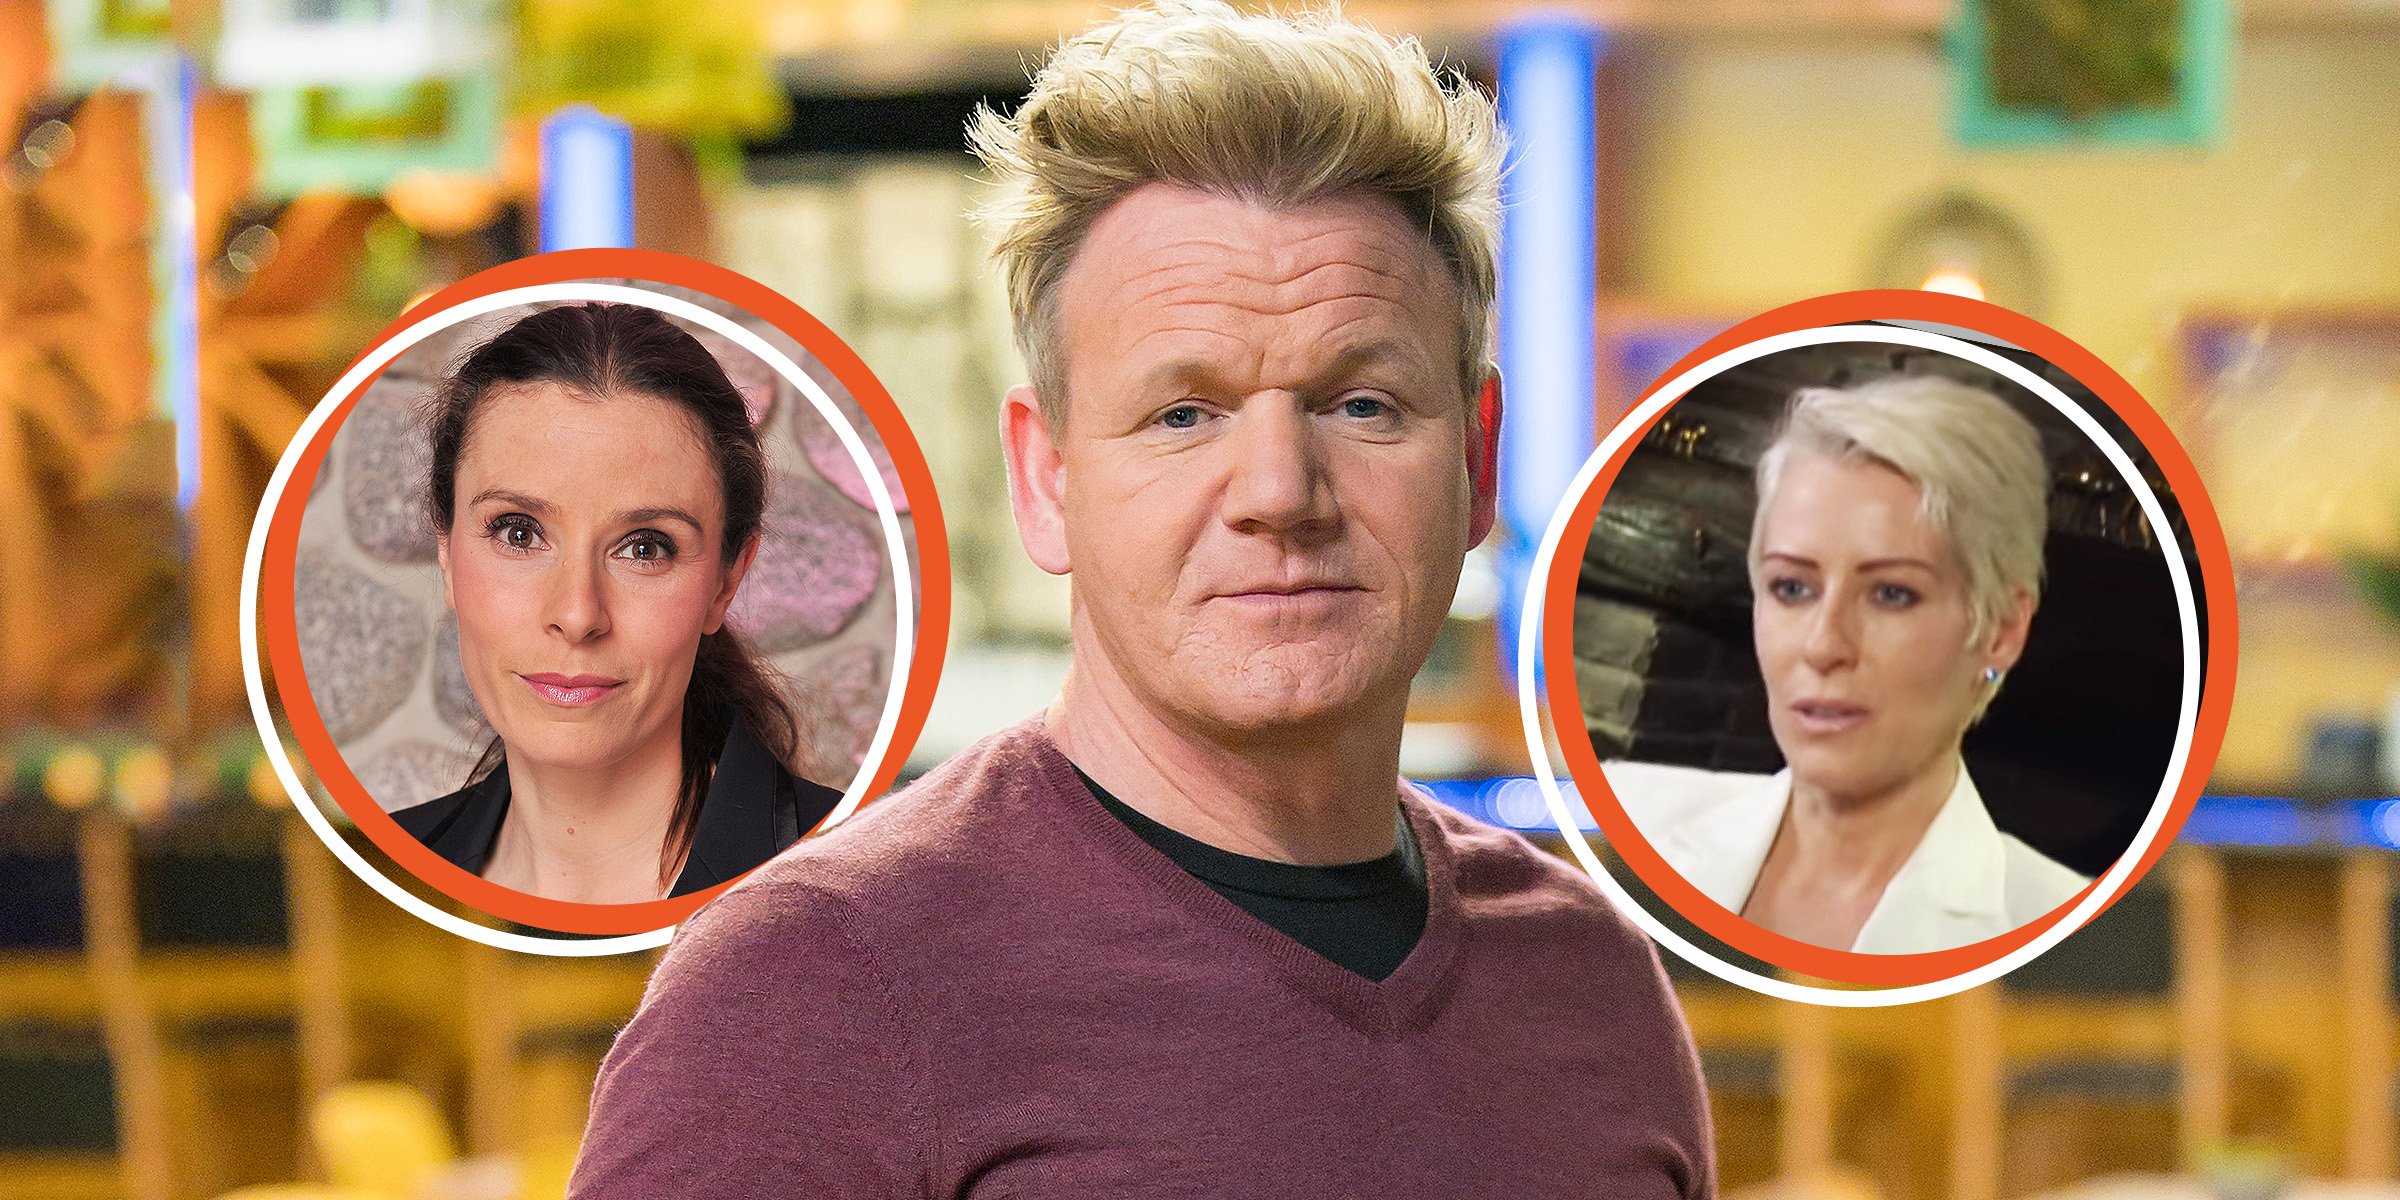 Tana Ramsay keeping a straight face in a photo [left] Gordon Ramsay at the special 2-hour Bear's Den Pizza" and "South Blvd season finale showing Tuesday, Feb. 25 [centre] Sarah Symonds in a youtube interview [right] | Source:  youtube.com/Biography Getty images